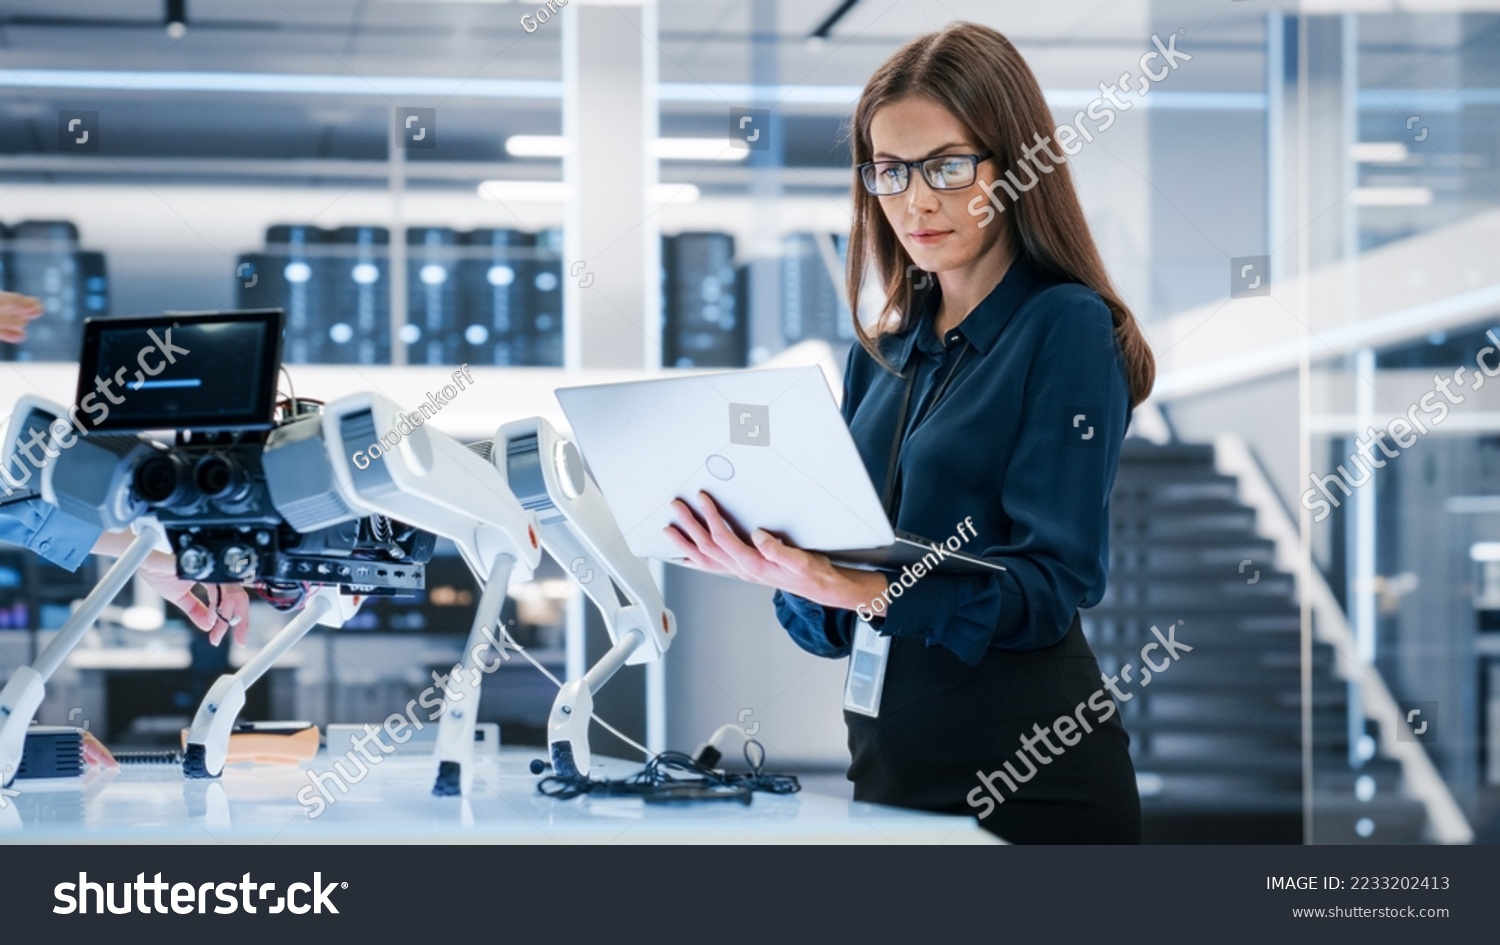 Portrait of a Young Robotics Engineer Using Laptop Computer, Analyzing Robotic Machine Concept in a High Tech Factory. Female Scientist Manipulate and Program the Robot for Work. #2233202413